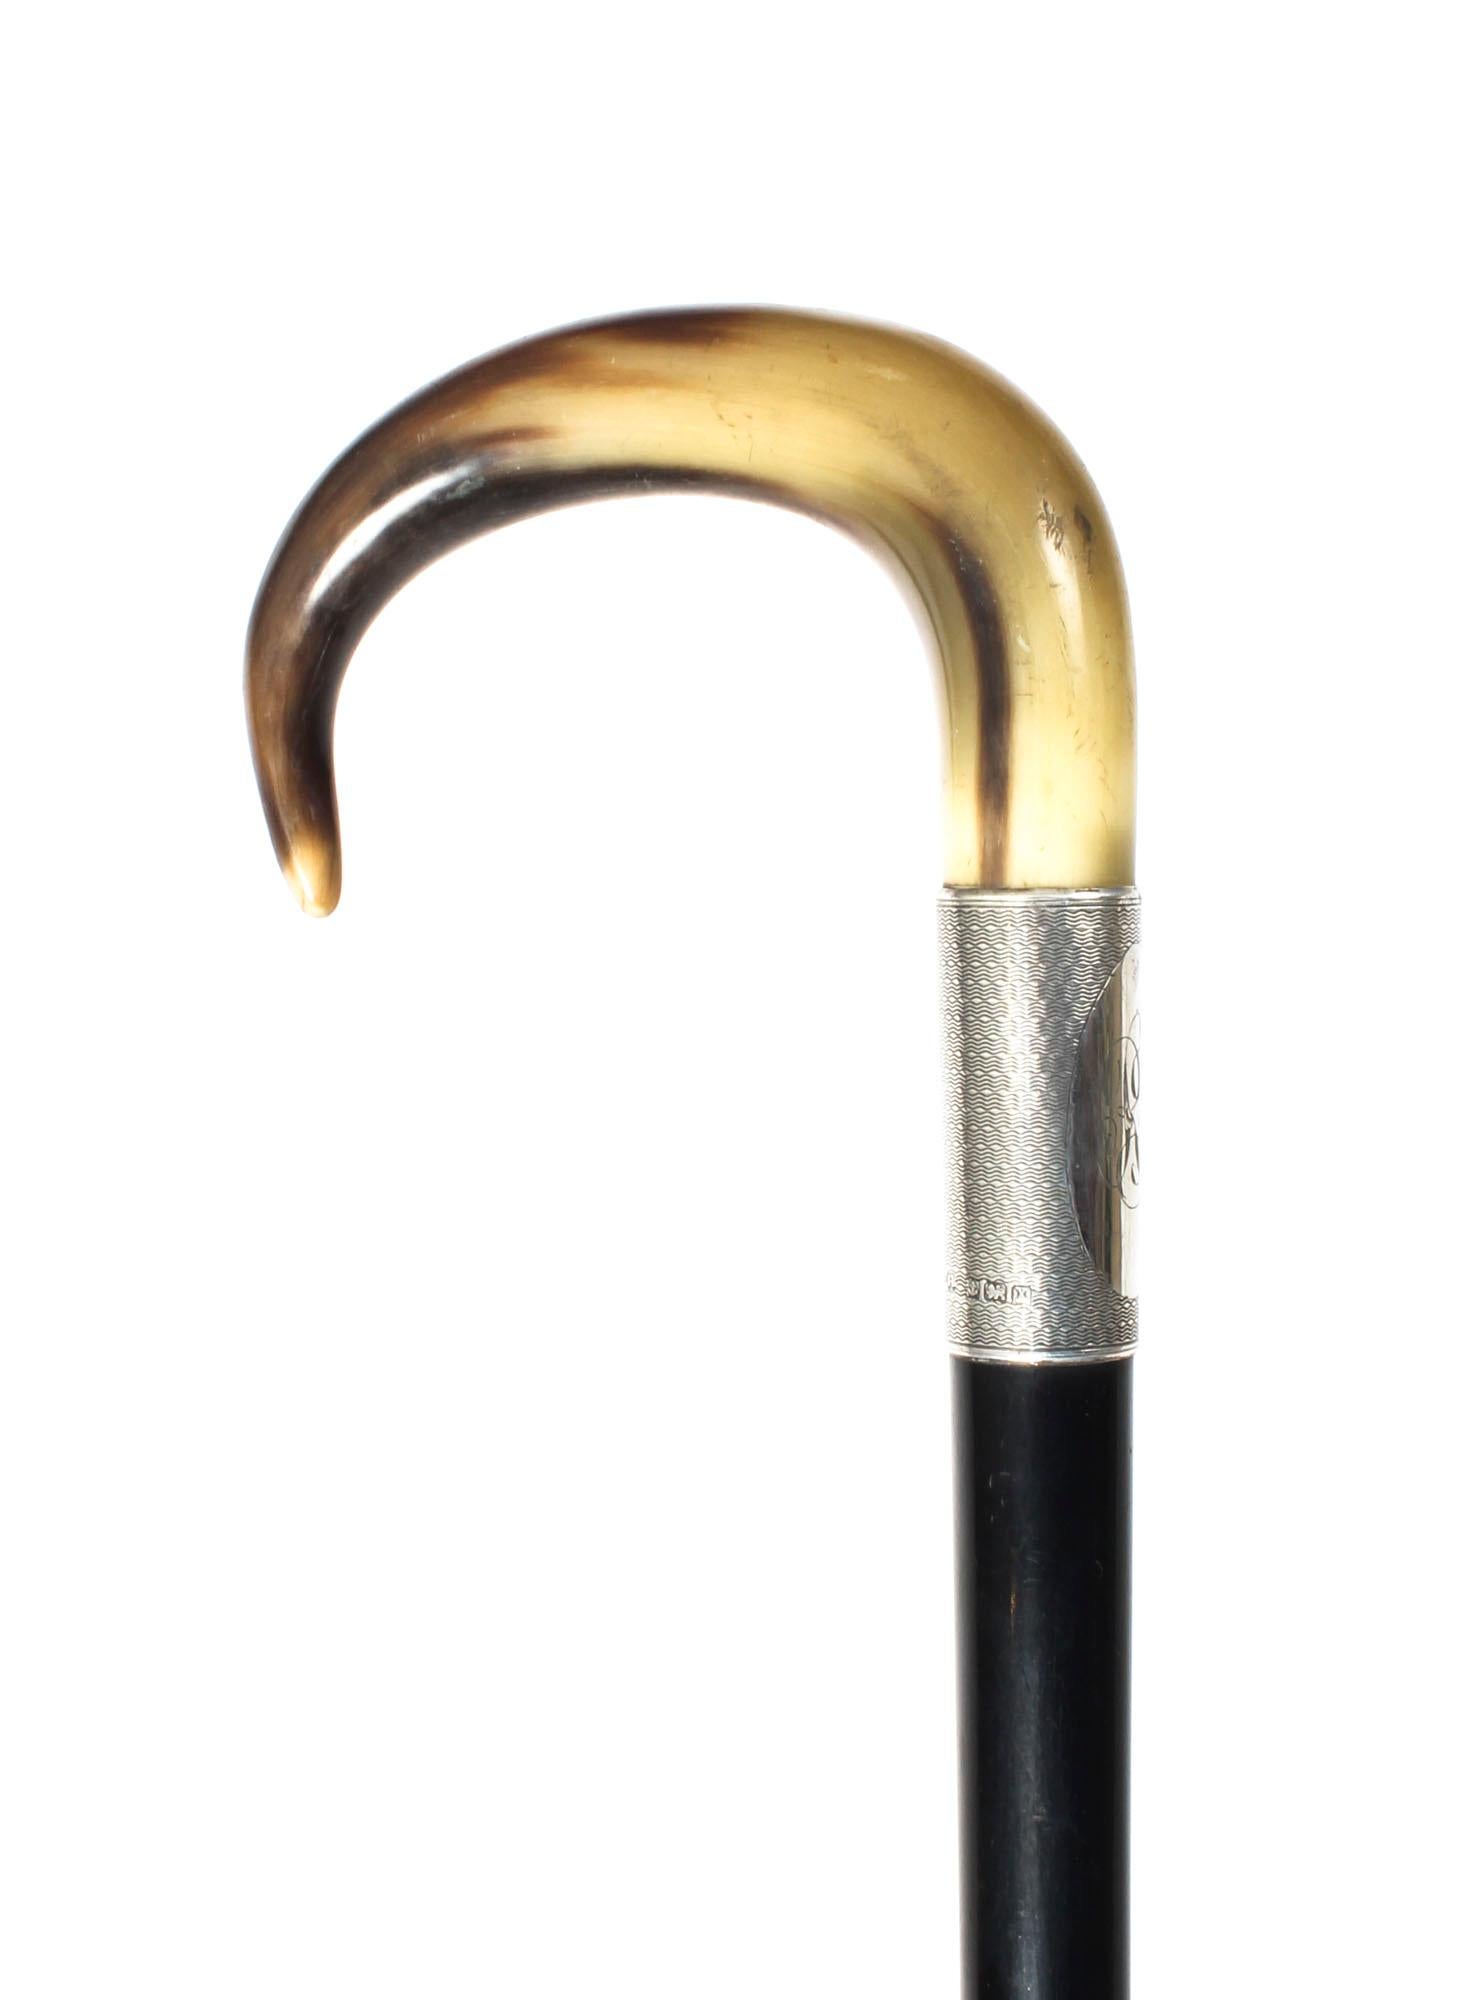 This is a beautiful antique George V horn handled ebonized walking stick, the silver collar bears hallmarks for Birmingham, 1922.

The horn handle is exquisitely carved in 'C' shape and features a broad monogrammed engine turned silver ferrule